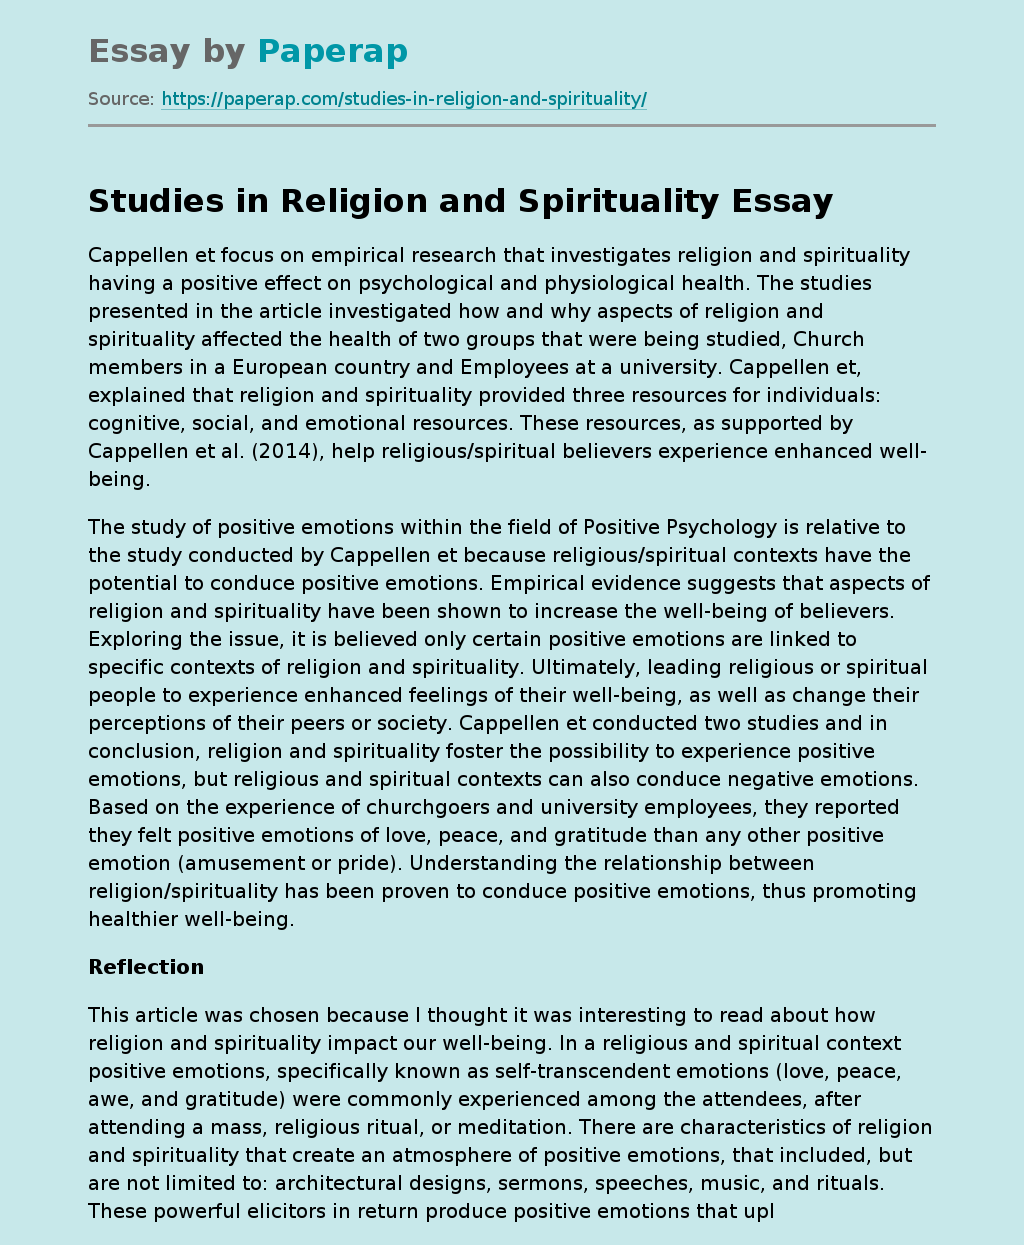 Studies in Religion and Spirituality